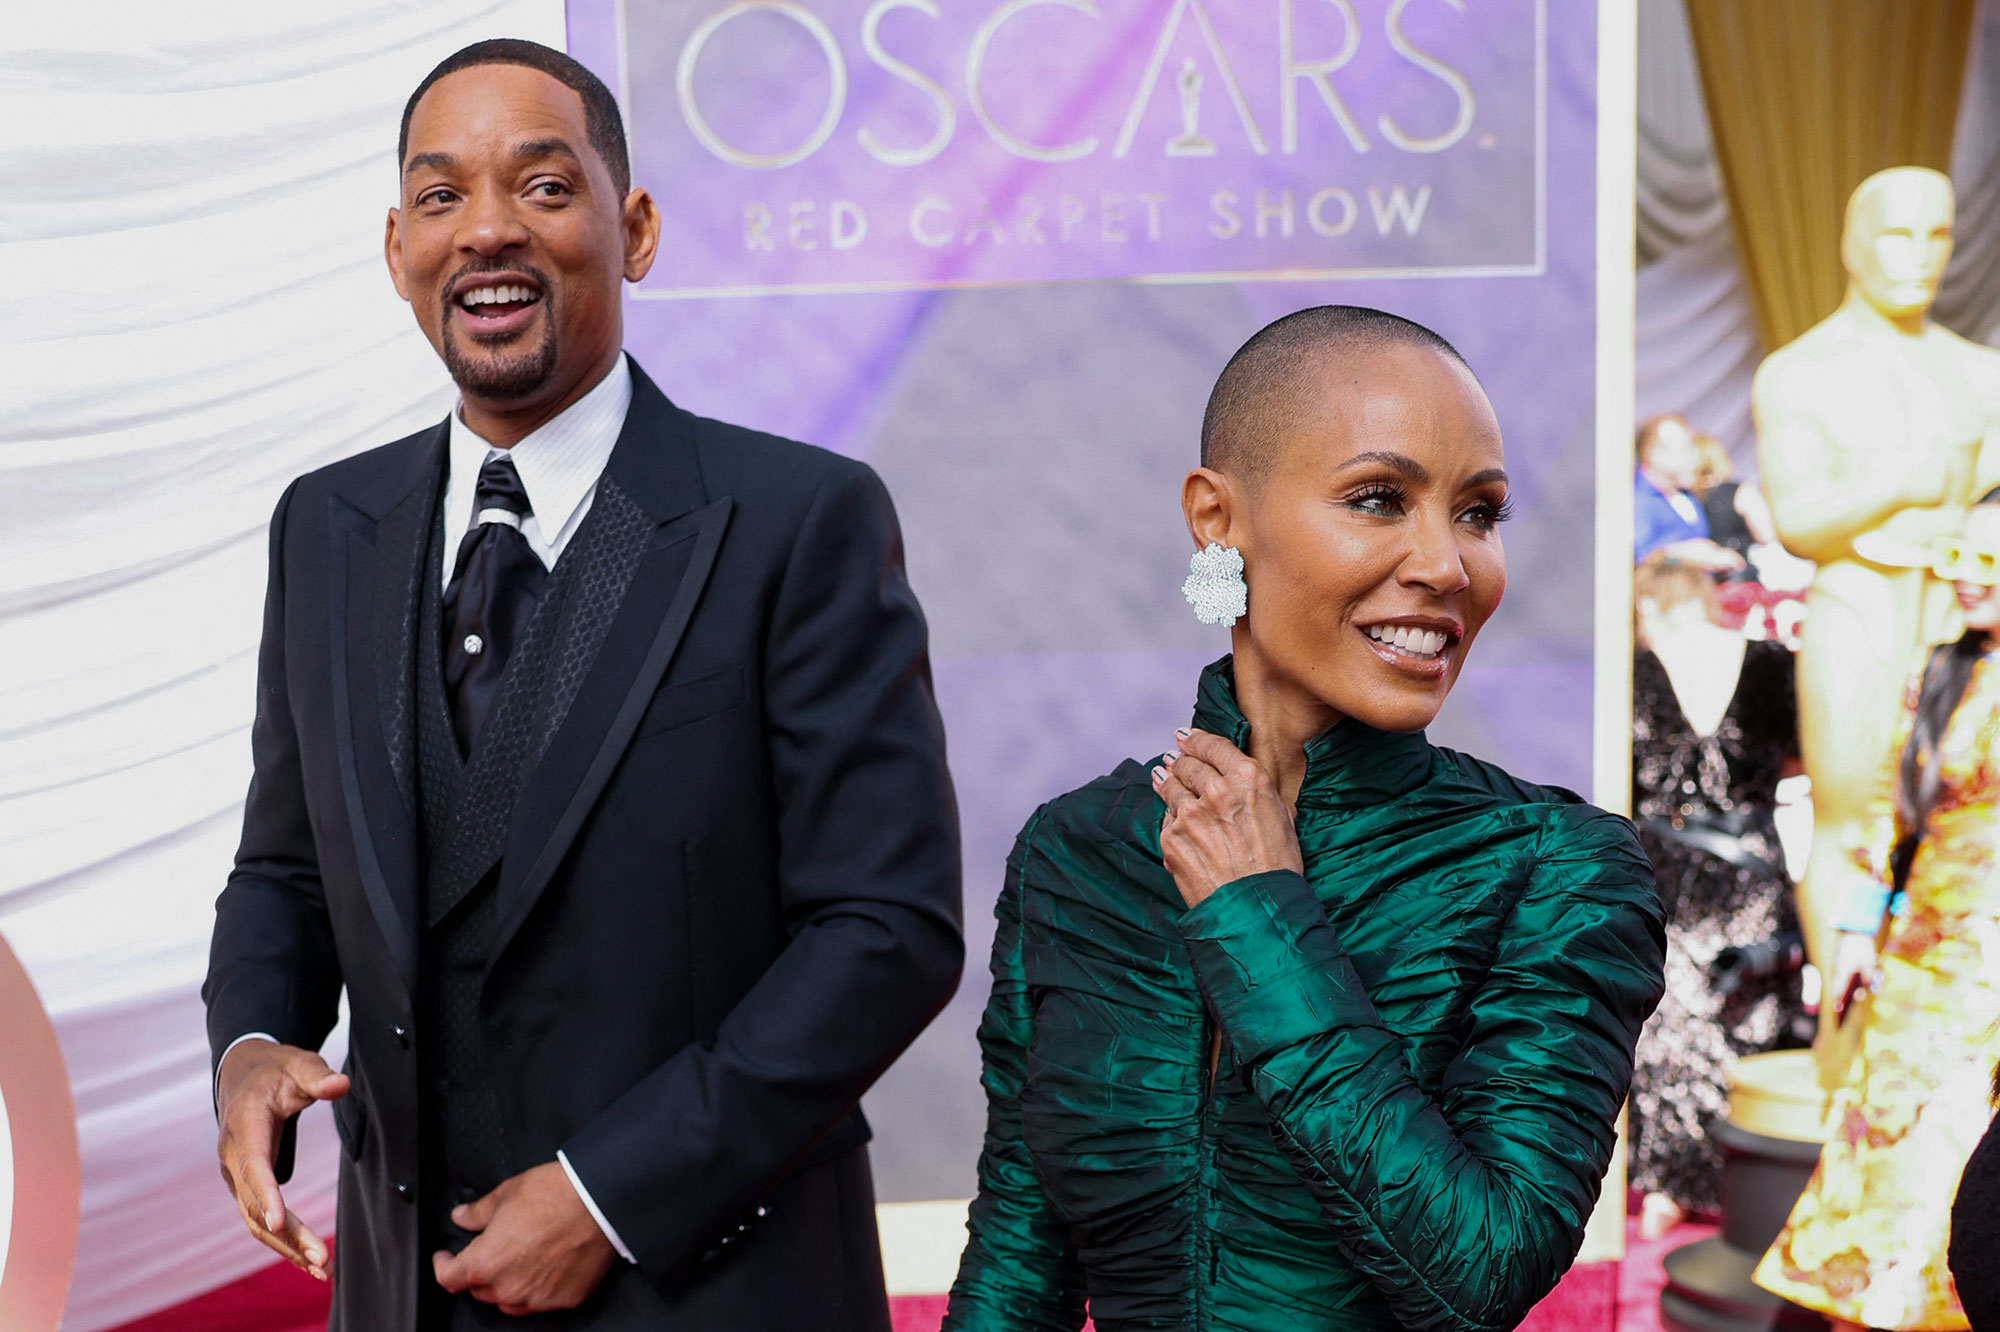 Jada Pinkett Smith, wife of Will Smith, comes out of silence after the Oscars